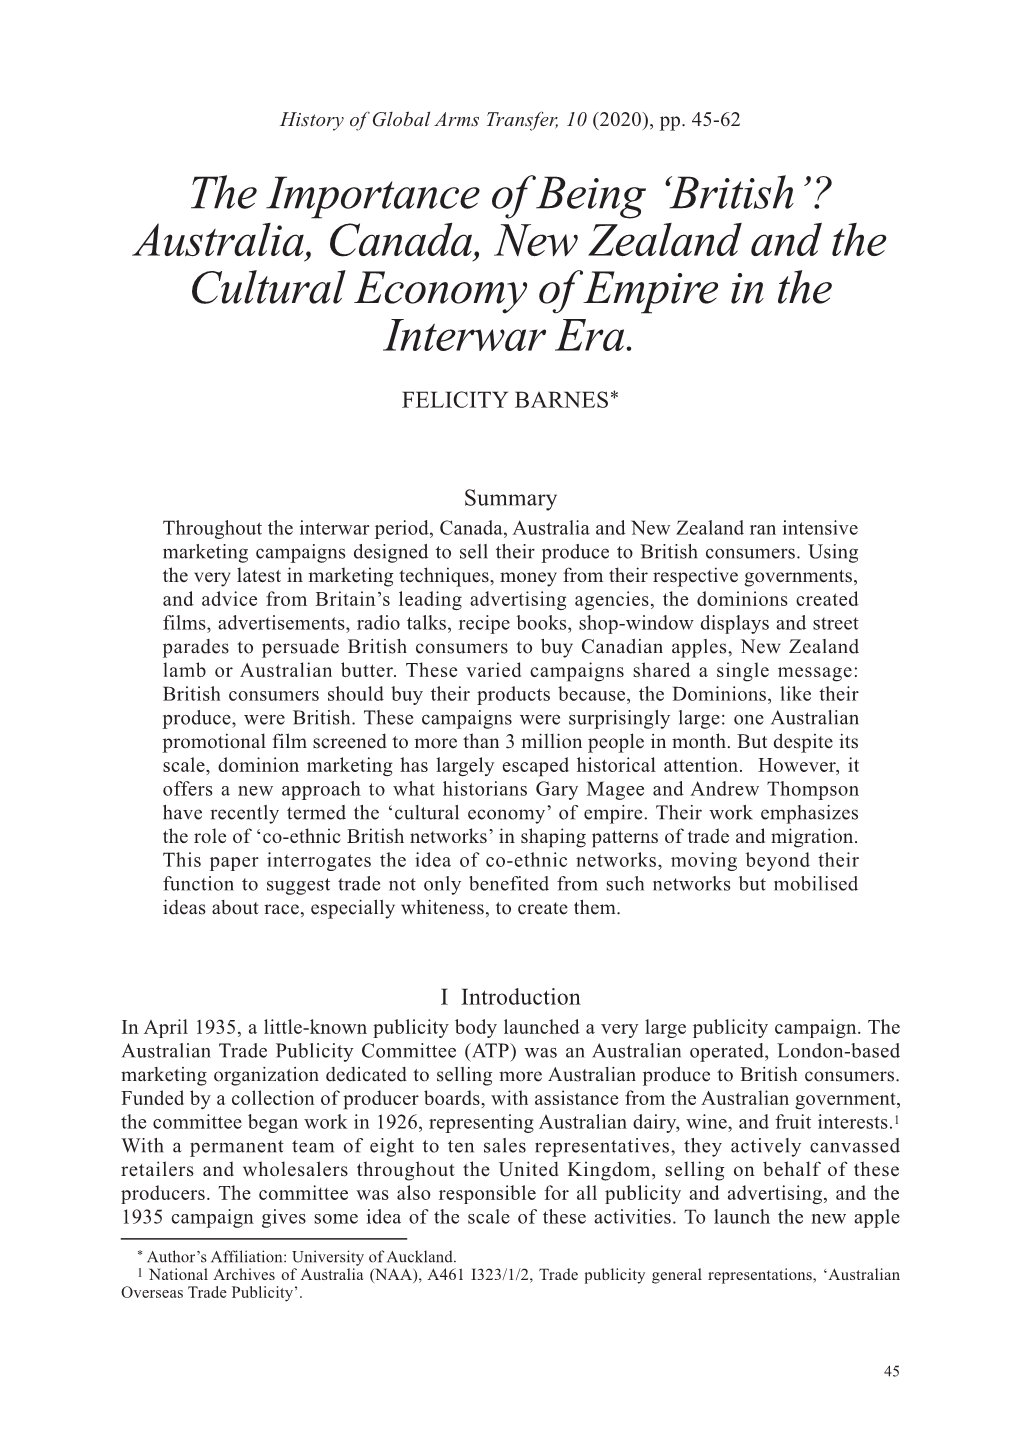 The Importance of Being 'British'? Australia, Canada, New Zealand and the Cultural Economy of Empire in the Interwar Era